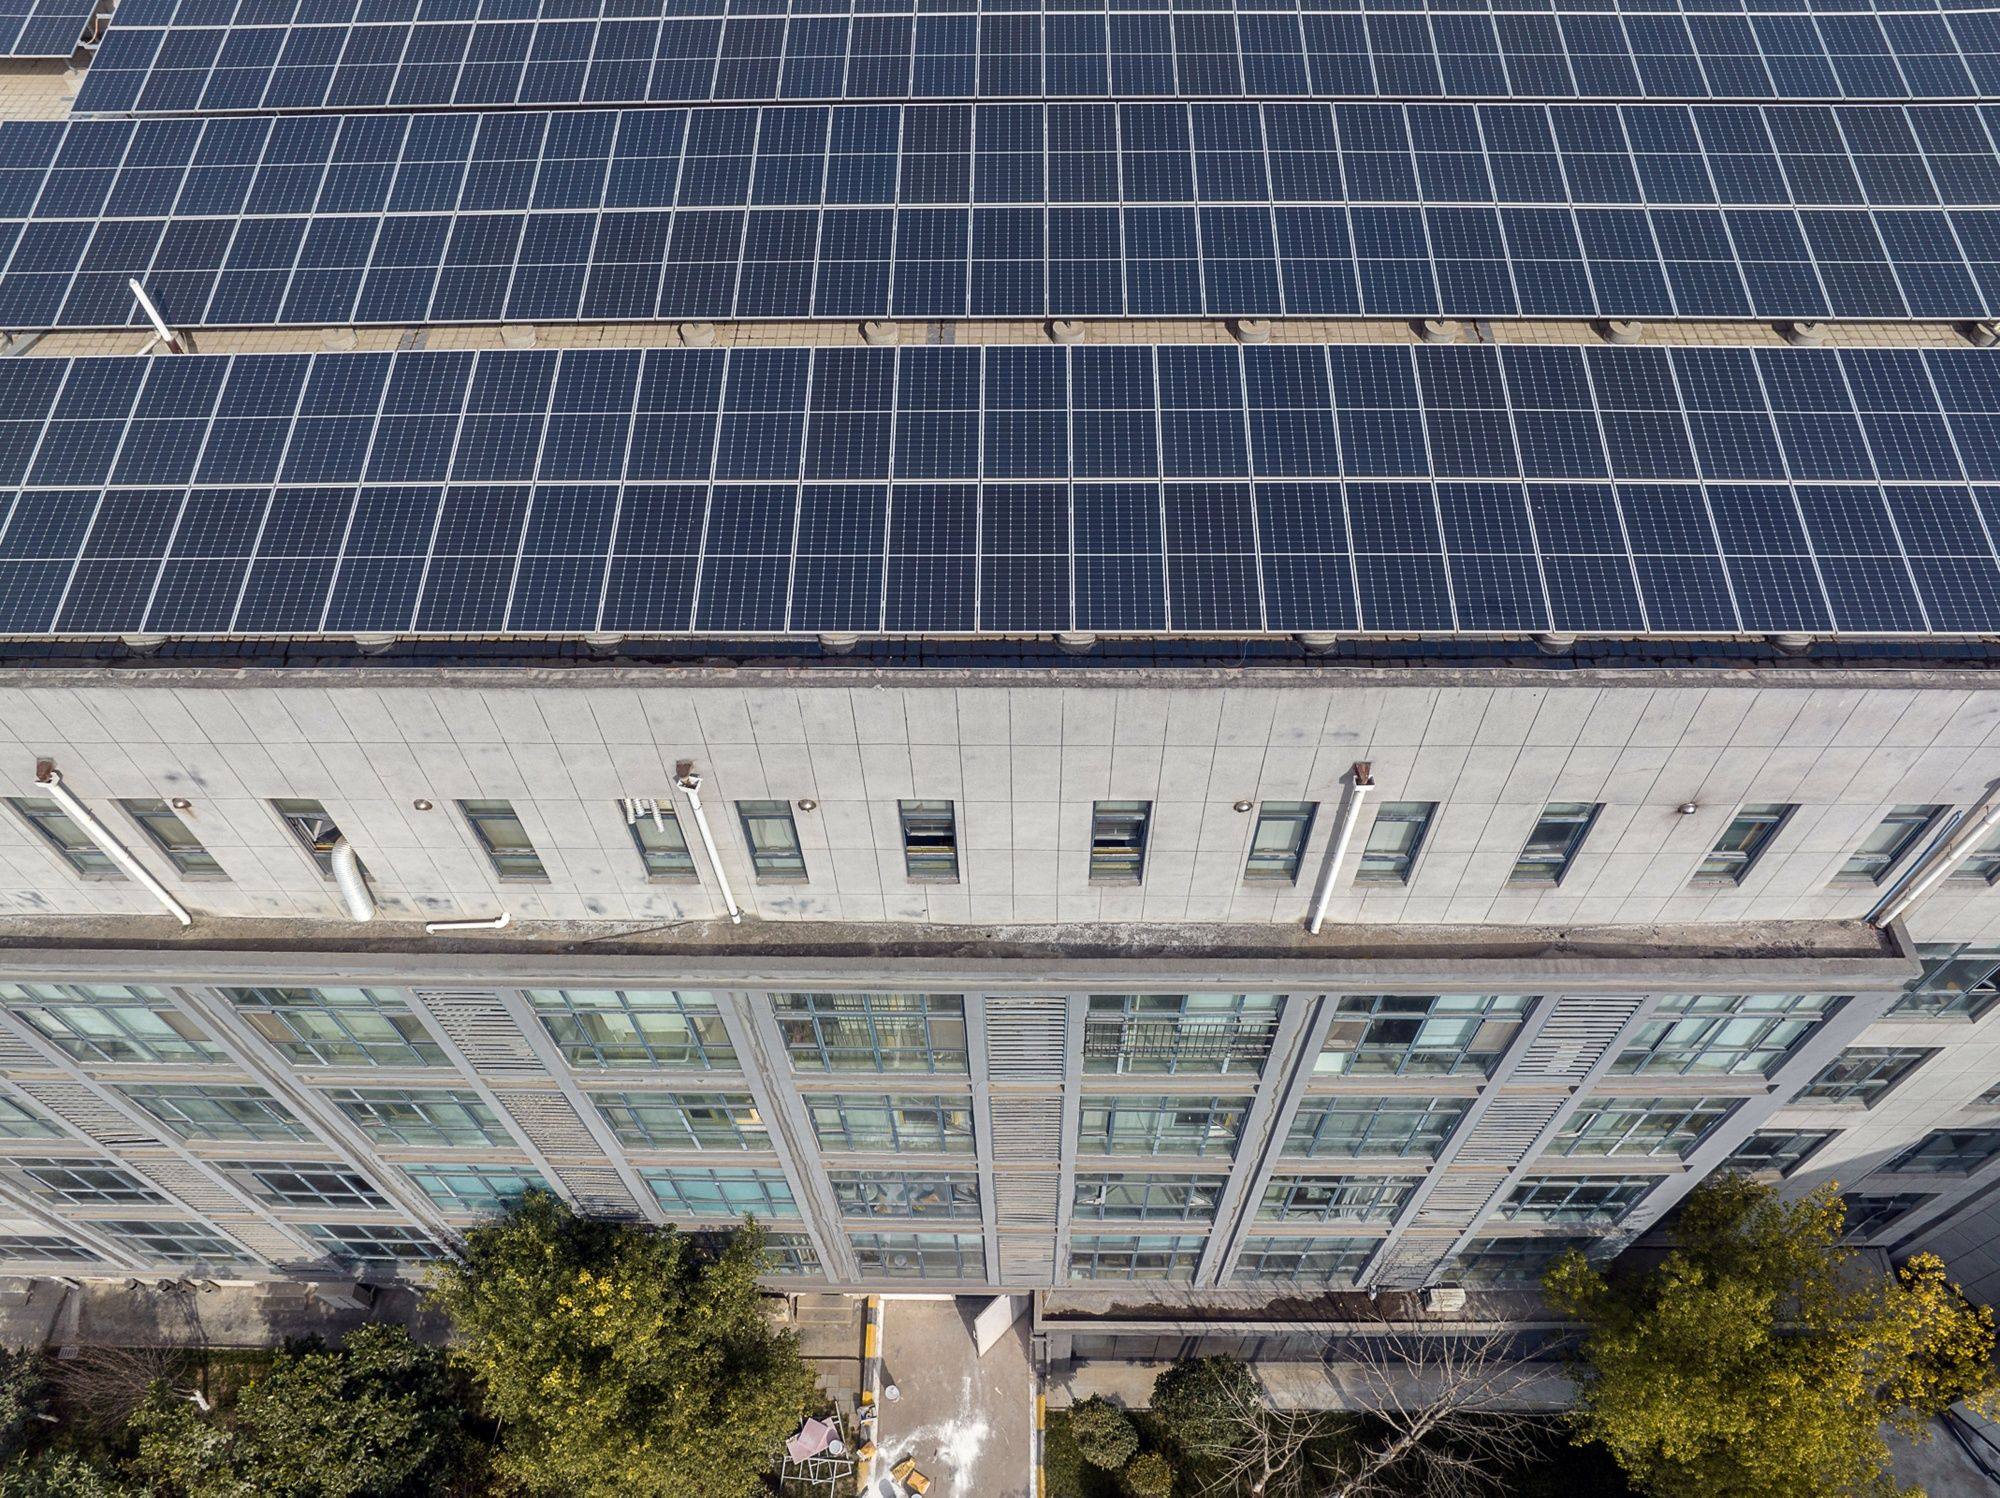 Longi Green Energy Technology solar panels on the rooftop of an office building in Xi’an, China. Photo: Bloomberg